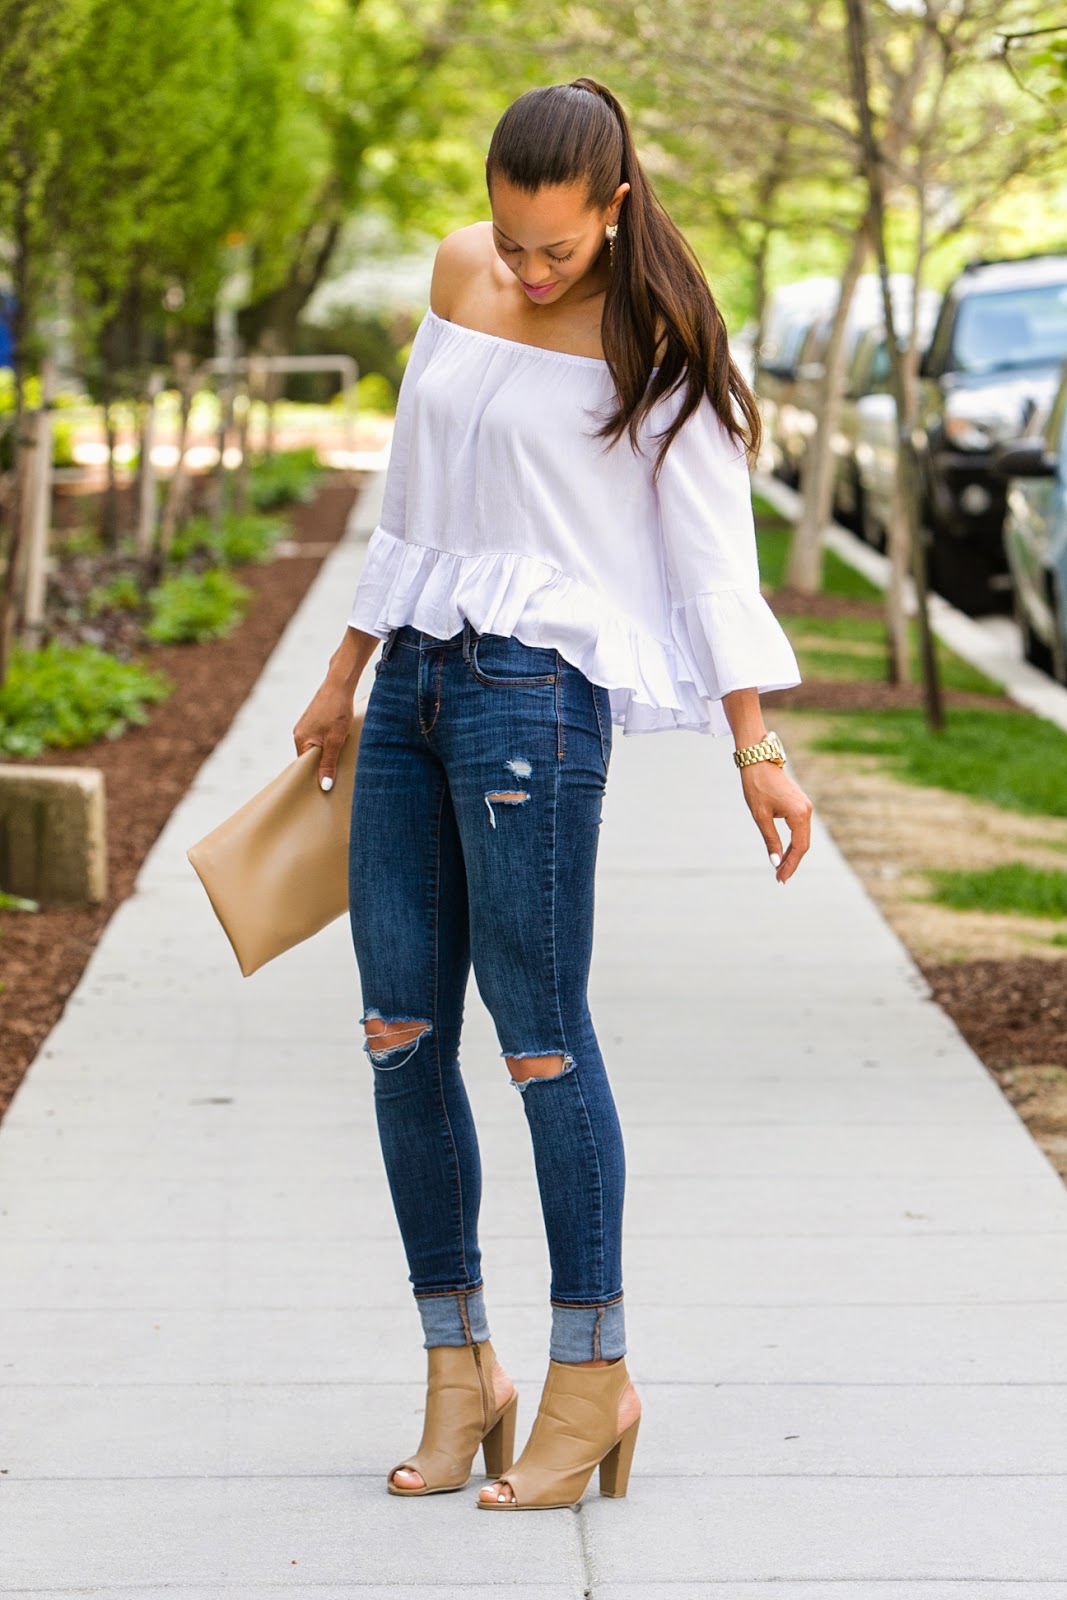 Jasmin daily : OFF THE SHOULDER